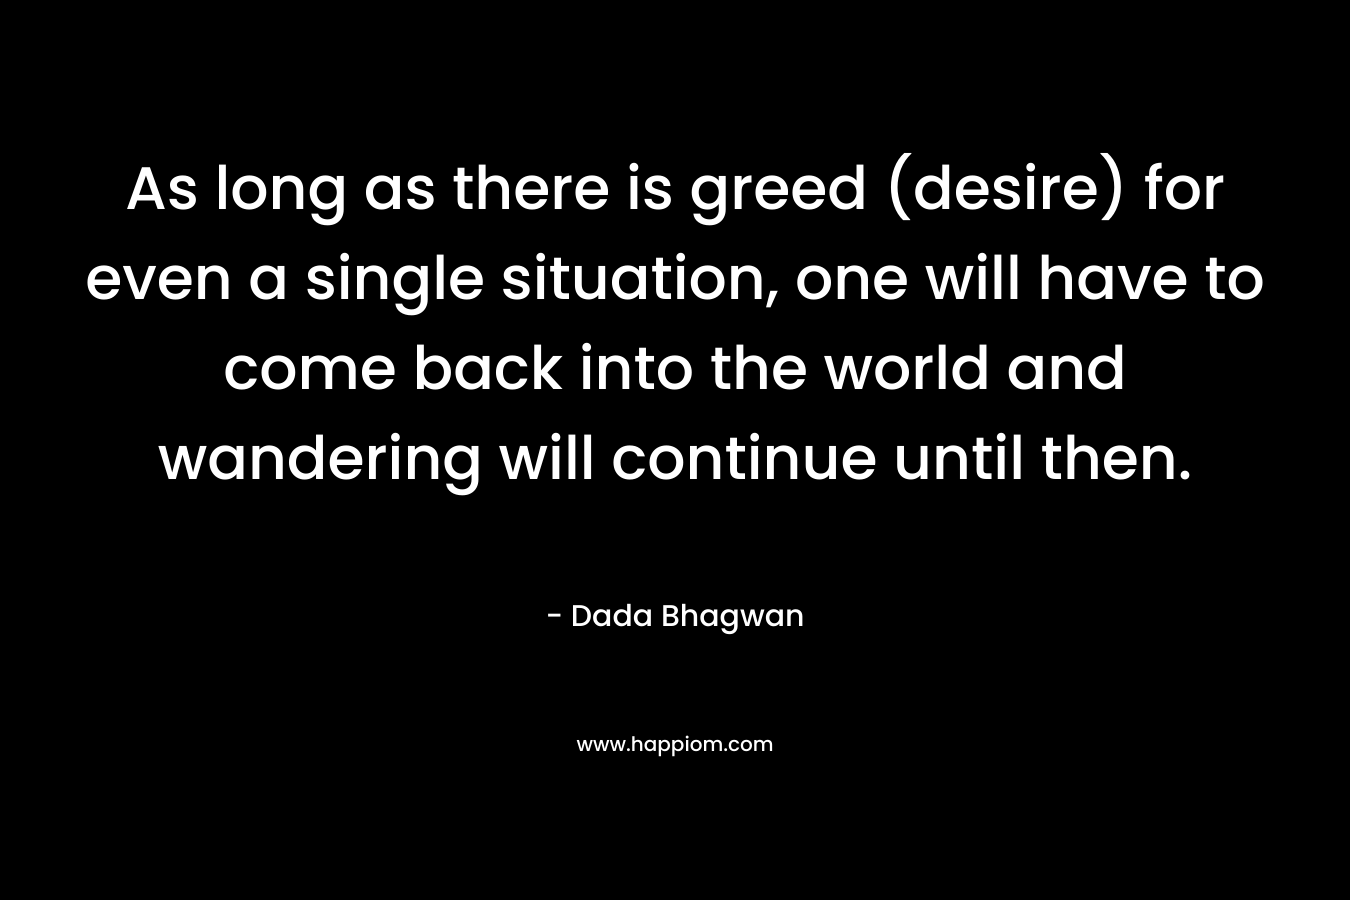 As long as there is greed (desire) for even a single situation, one will have to come back into the world and wandering will continue until then.